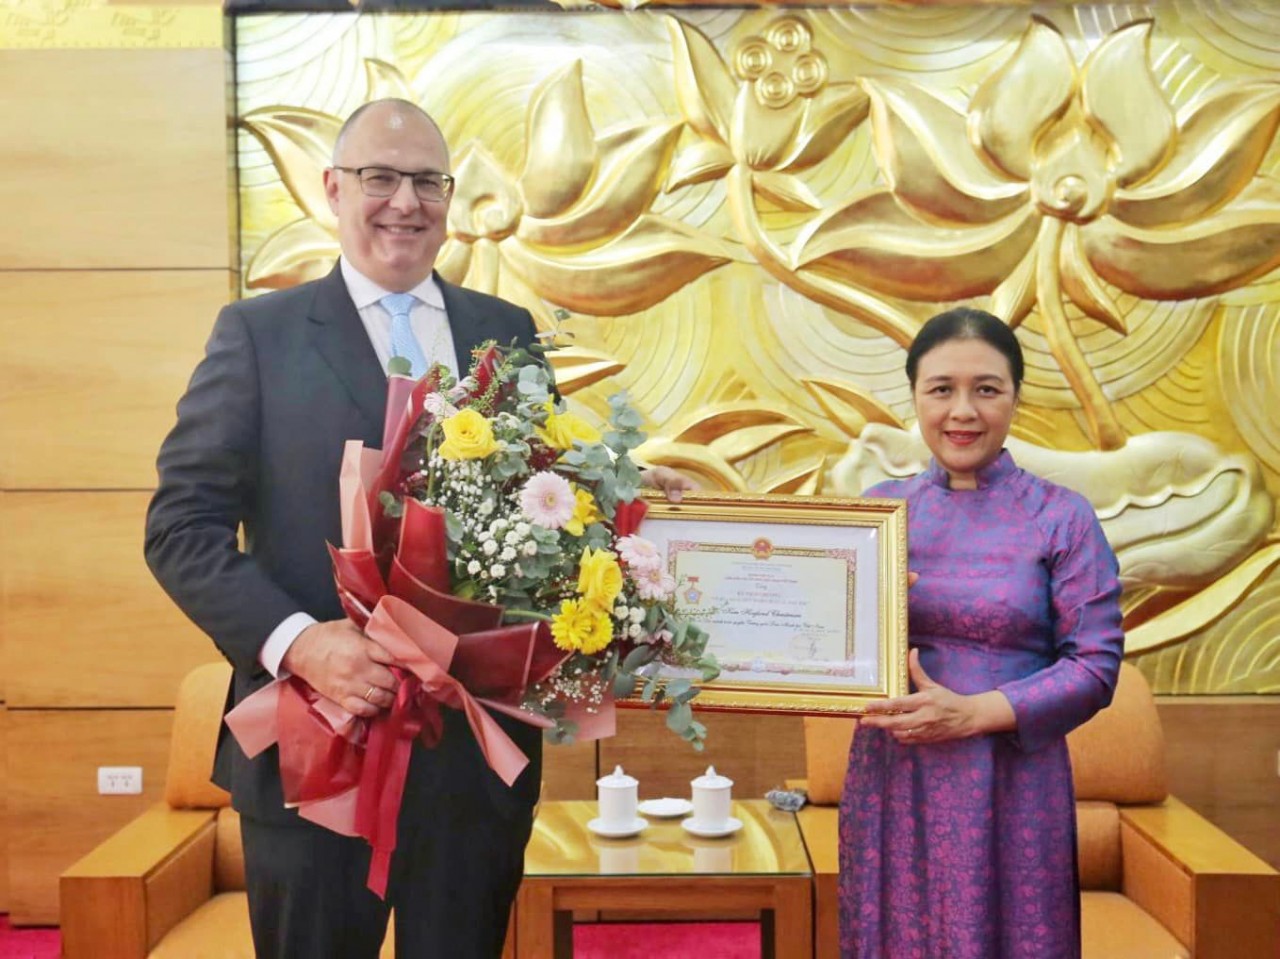  Danish Ambassador to Vietnam Kim Højlund Christensen on July 4 was awarded the insignia “For peace and friendship among nations” for his contributions to promoting traditional friendship and cooperation between Vietnam and Denmark.